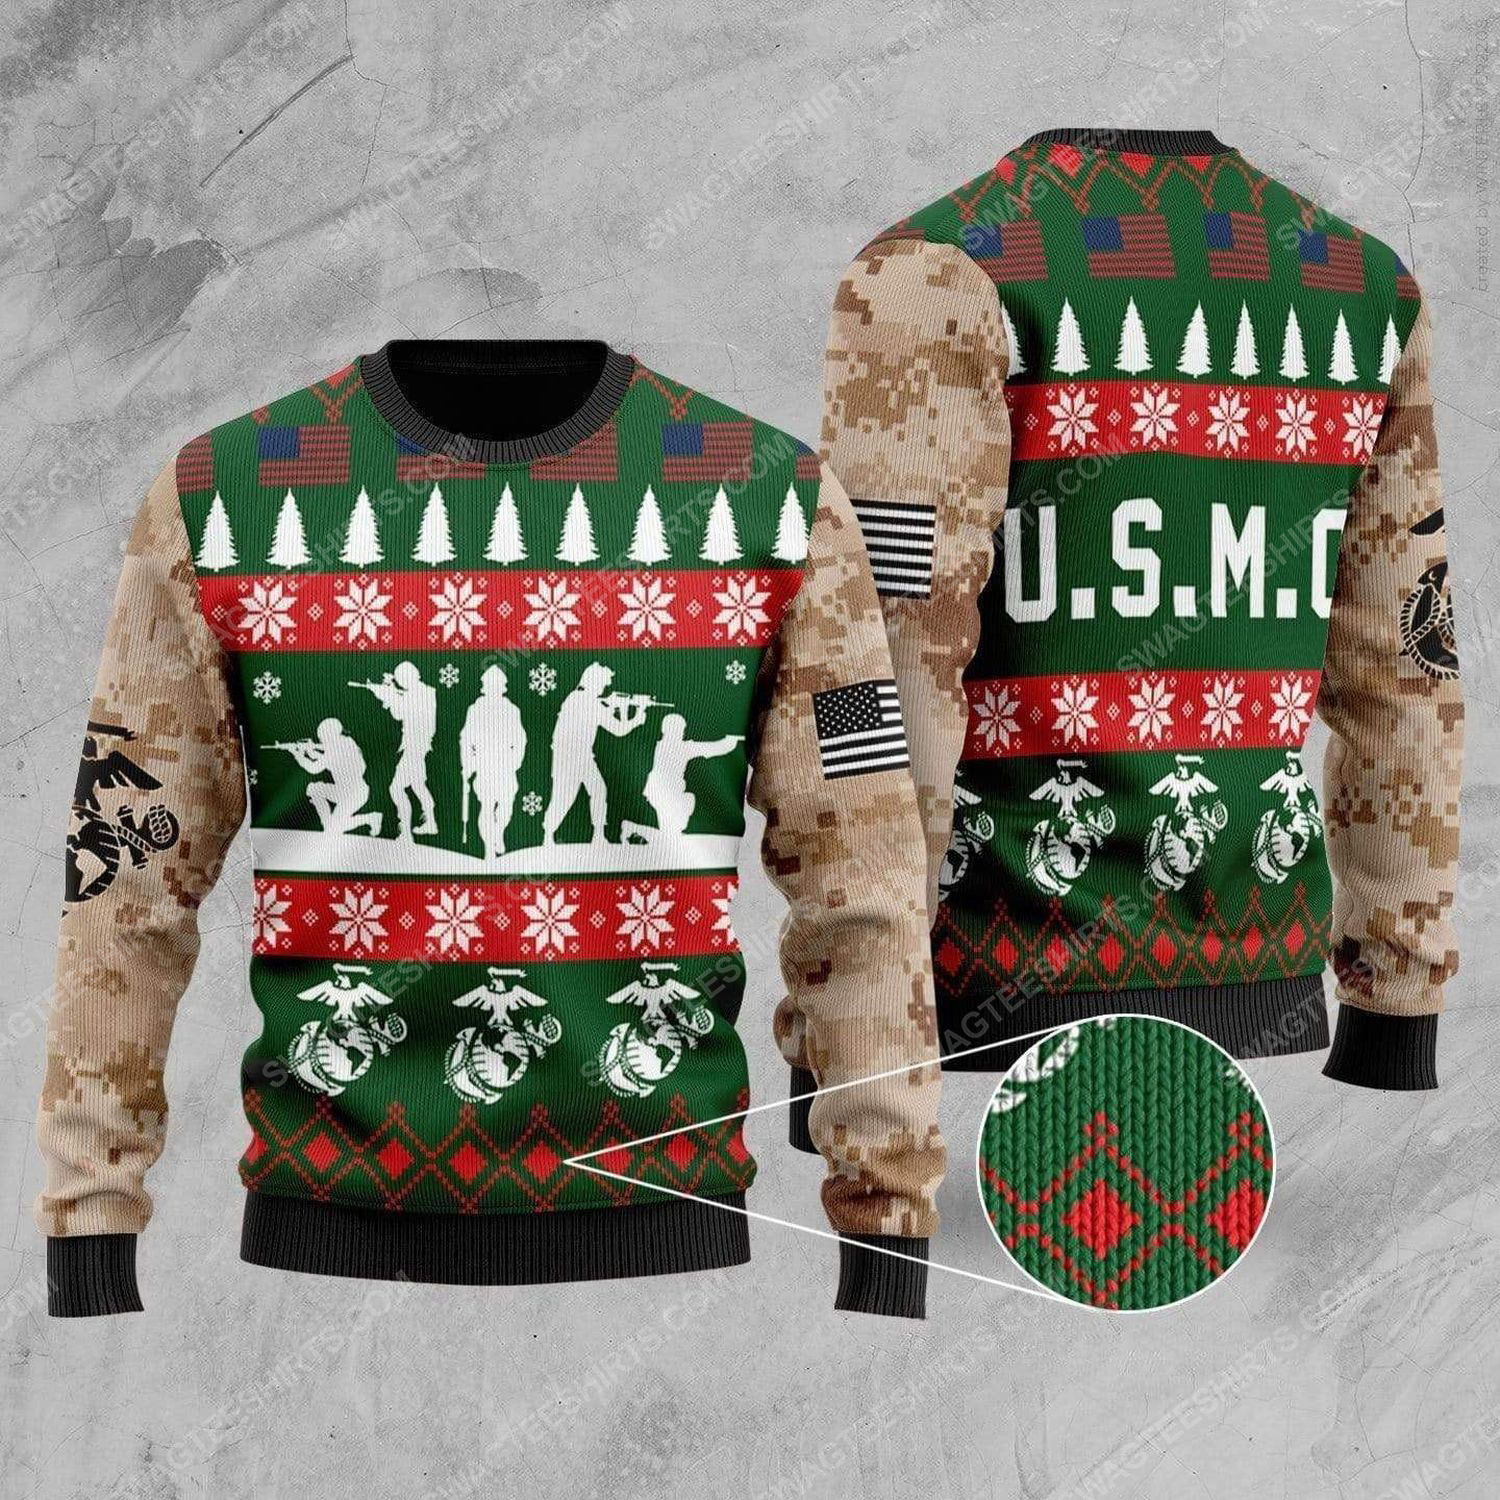 United states marine corps all over print ugly christmas sweater 1